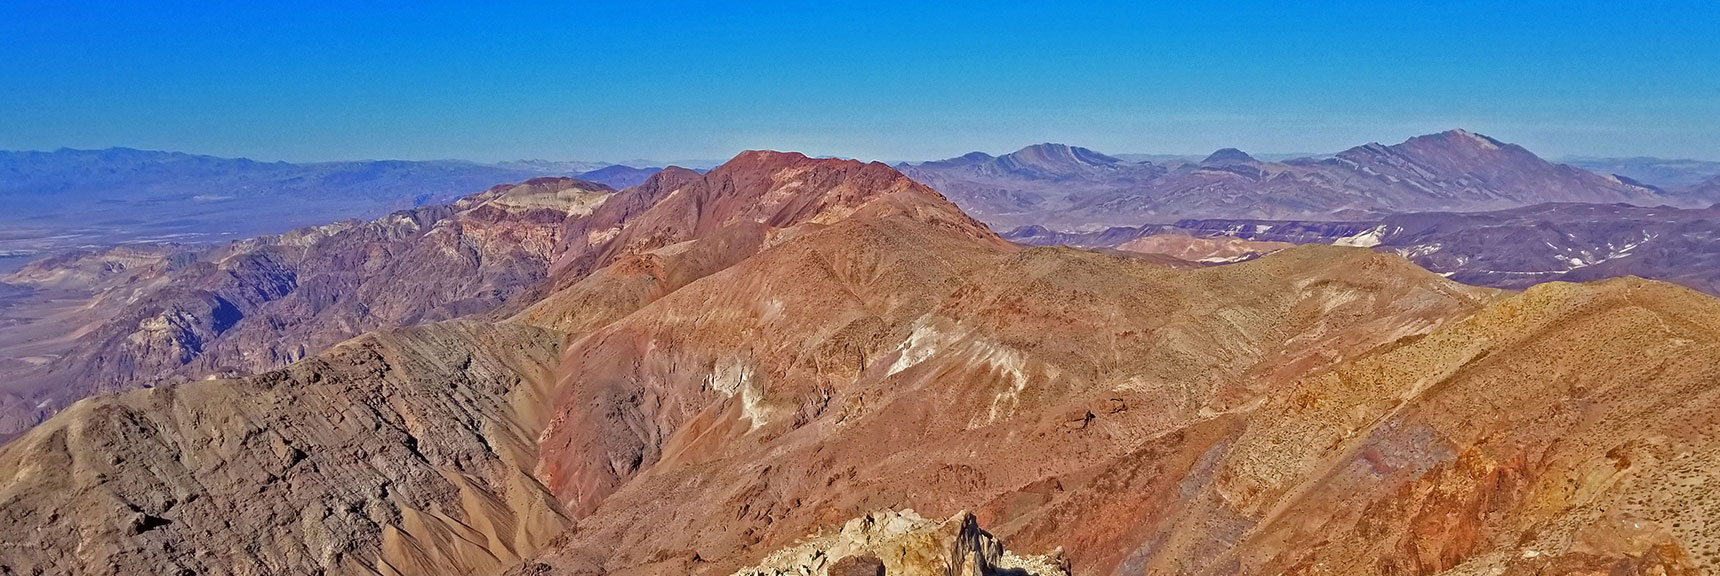 View North from Dante's Ridge | Dante's View to Mt. Perry | Death Valley National Park, CA